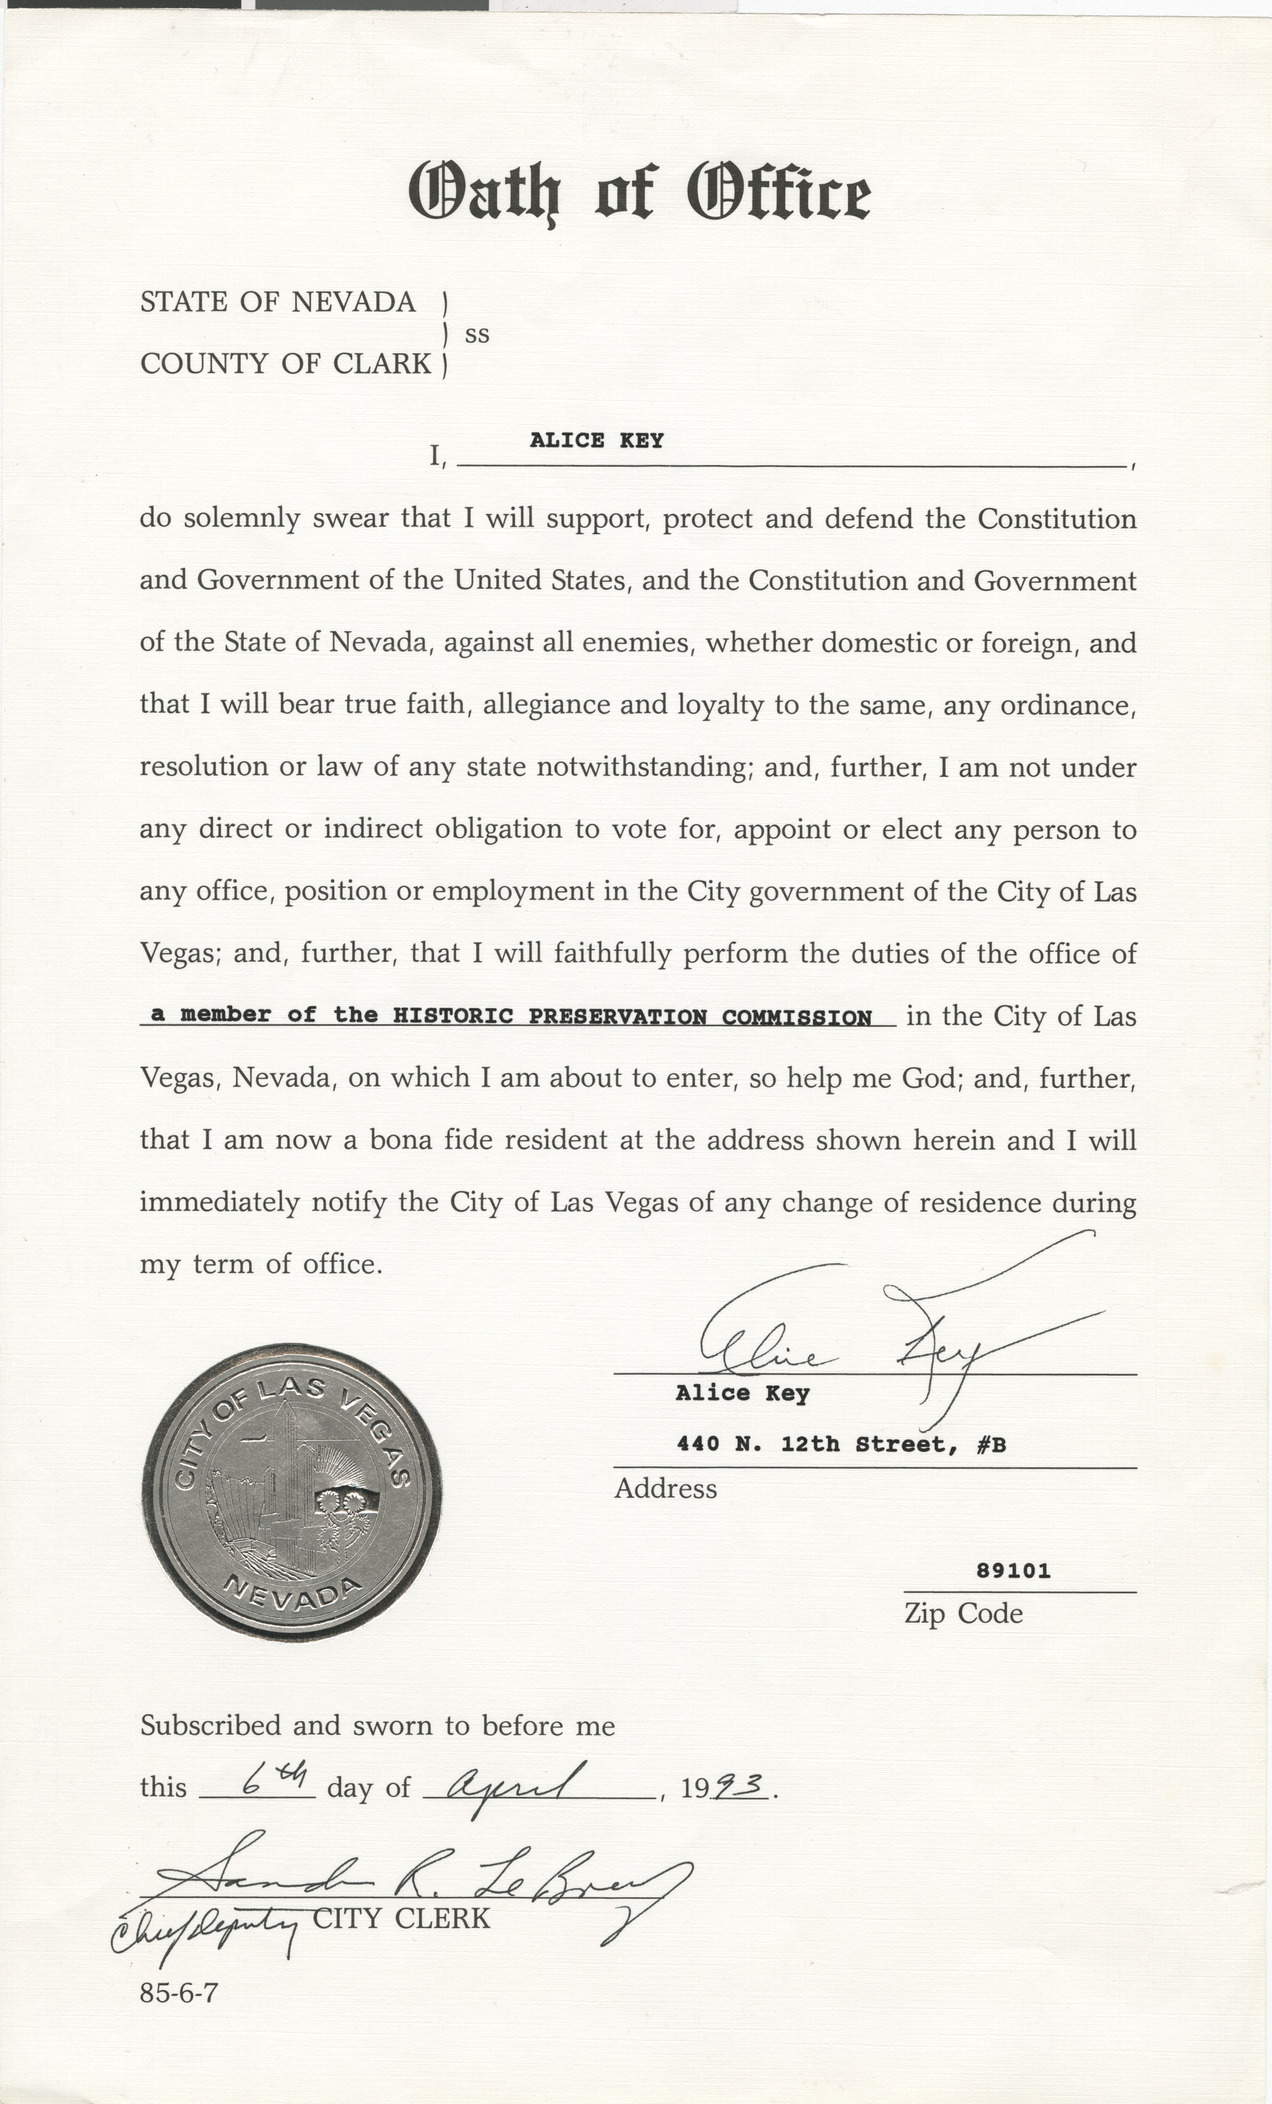 Oath of Office from the State of Nevada for Alice Key to perform the duties of a member of the Historic Preservation Commission, April 6, 1993